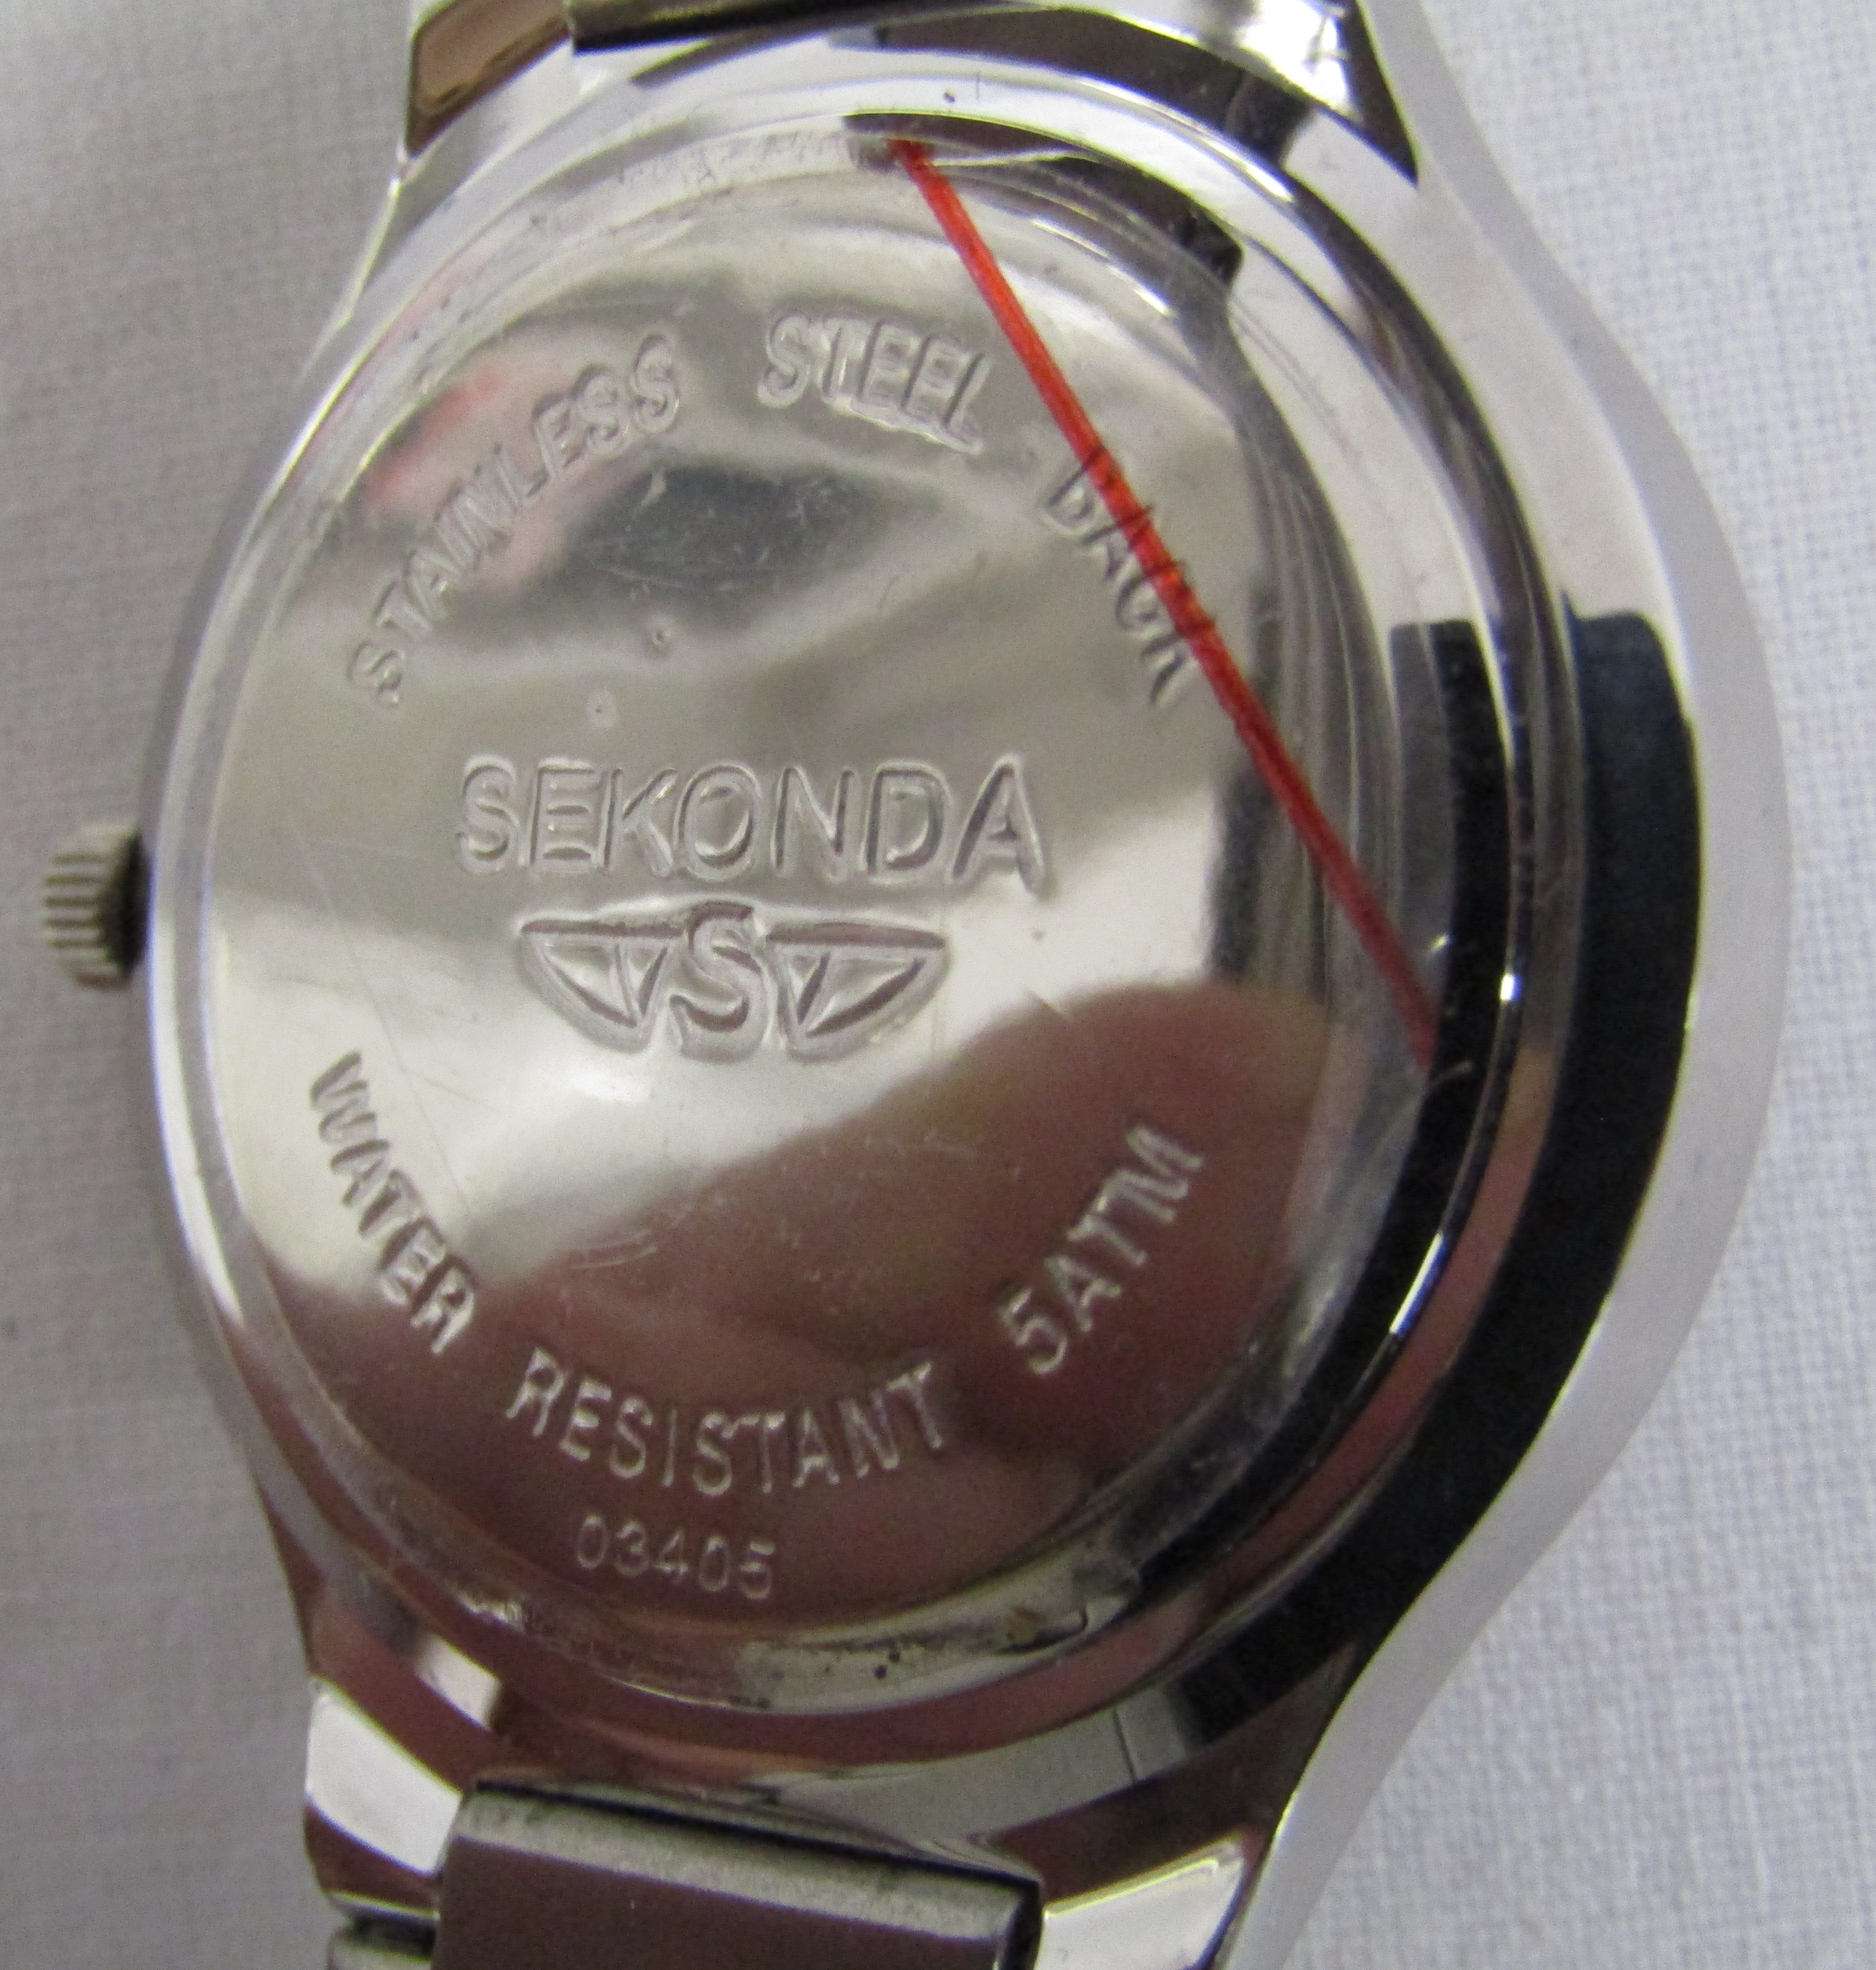 6 men's Sekonda watches - 1525 digital, 03405 with date, 3846 with date, 3407H chronograph, N3490 - Image 5 of 13